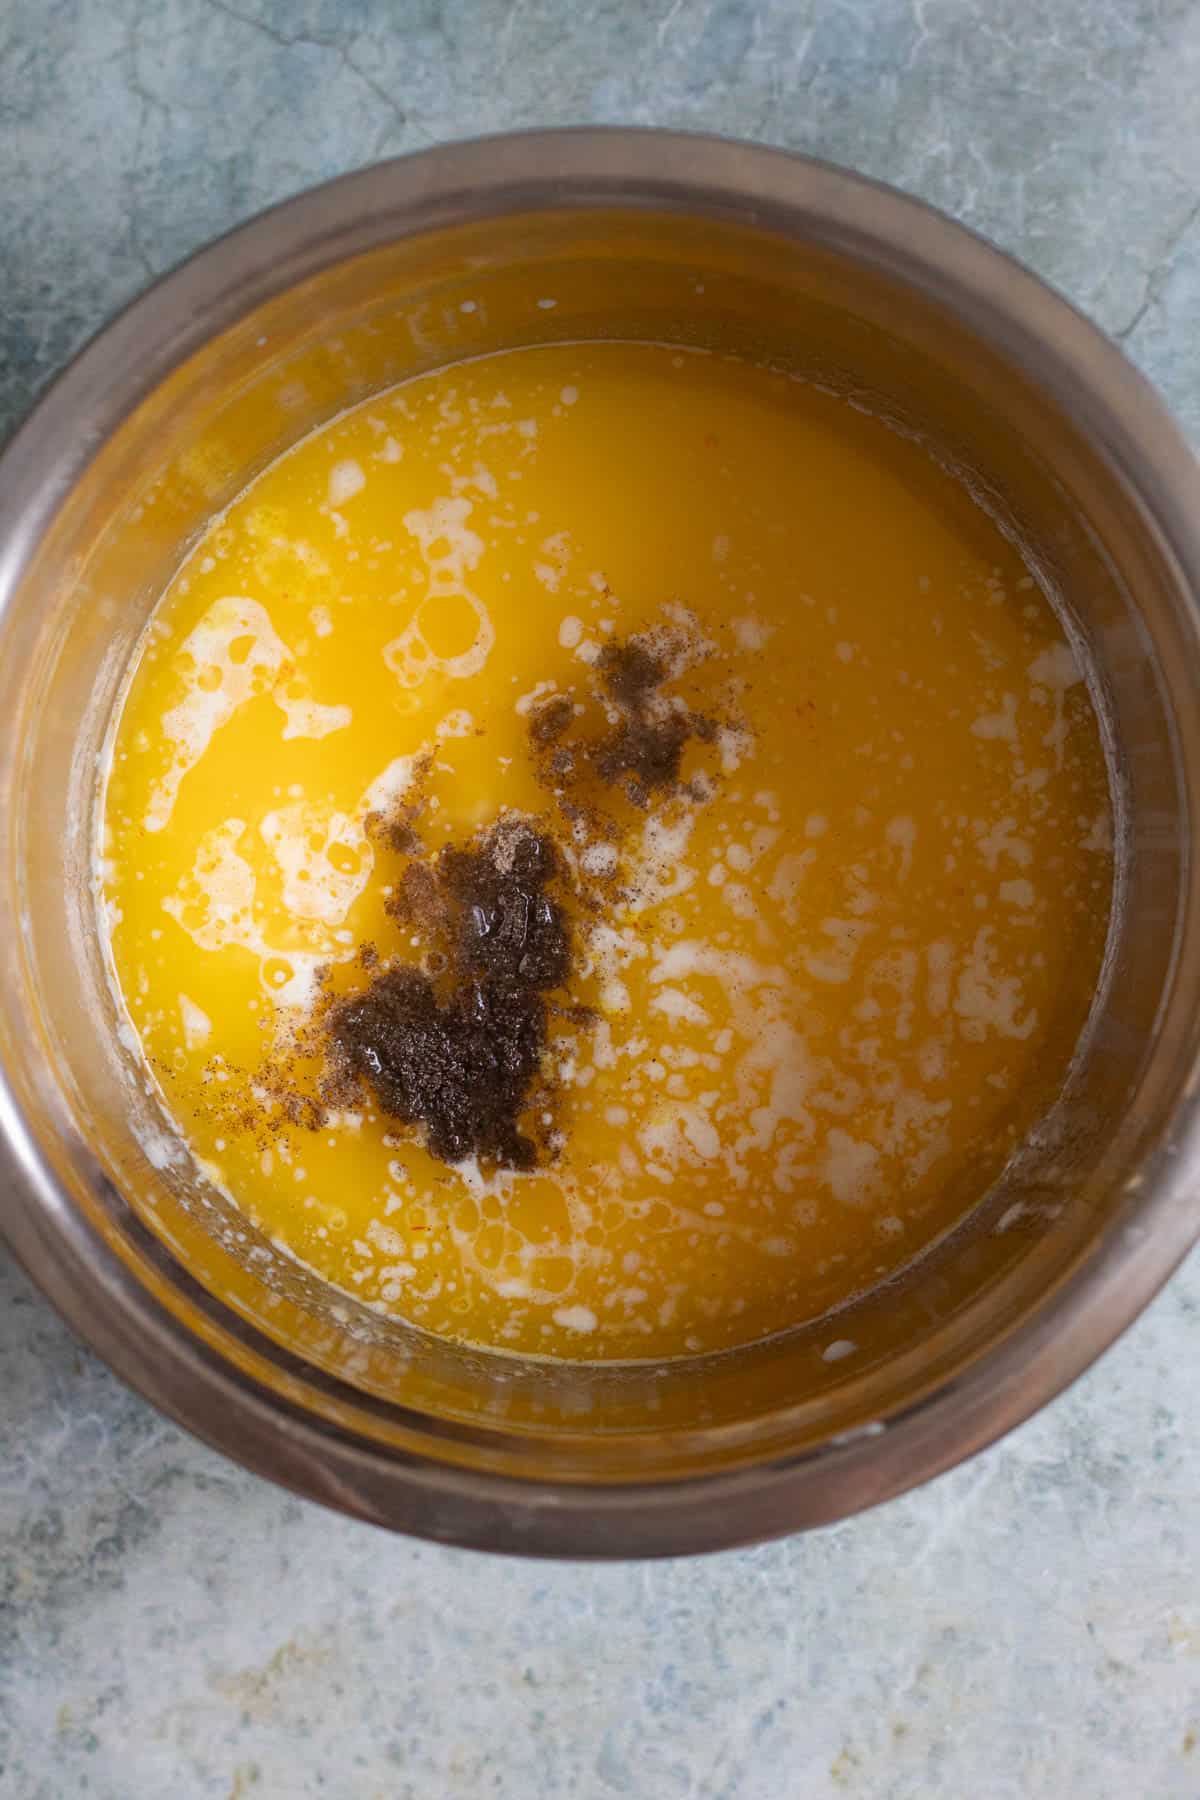 The saffron mixture combined with the melted butter and milk, then stir in the cardamom and rose water. 